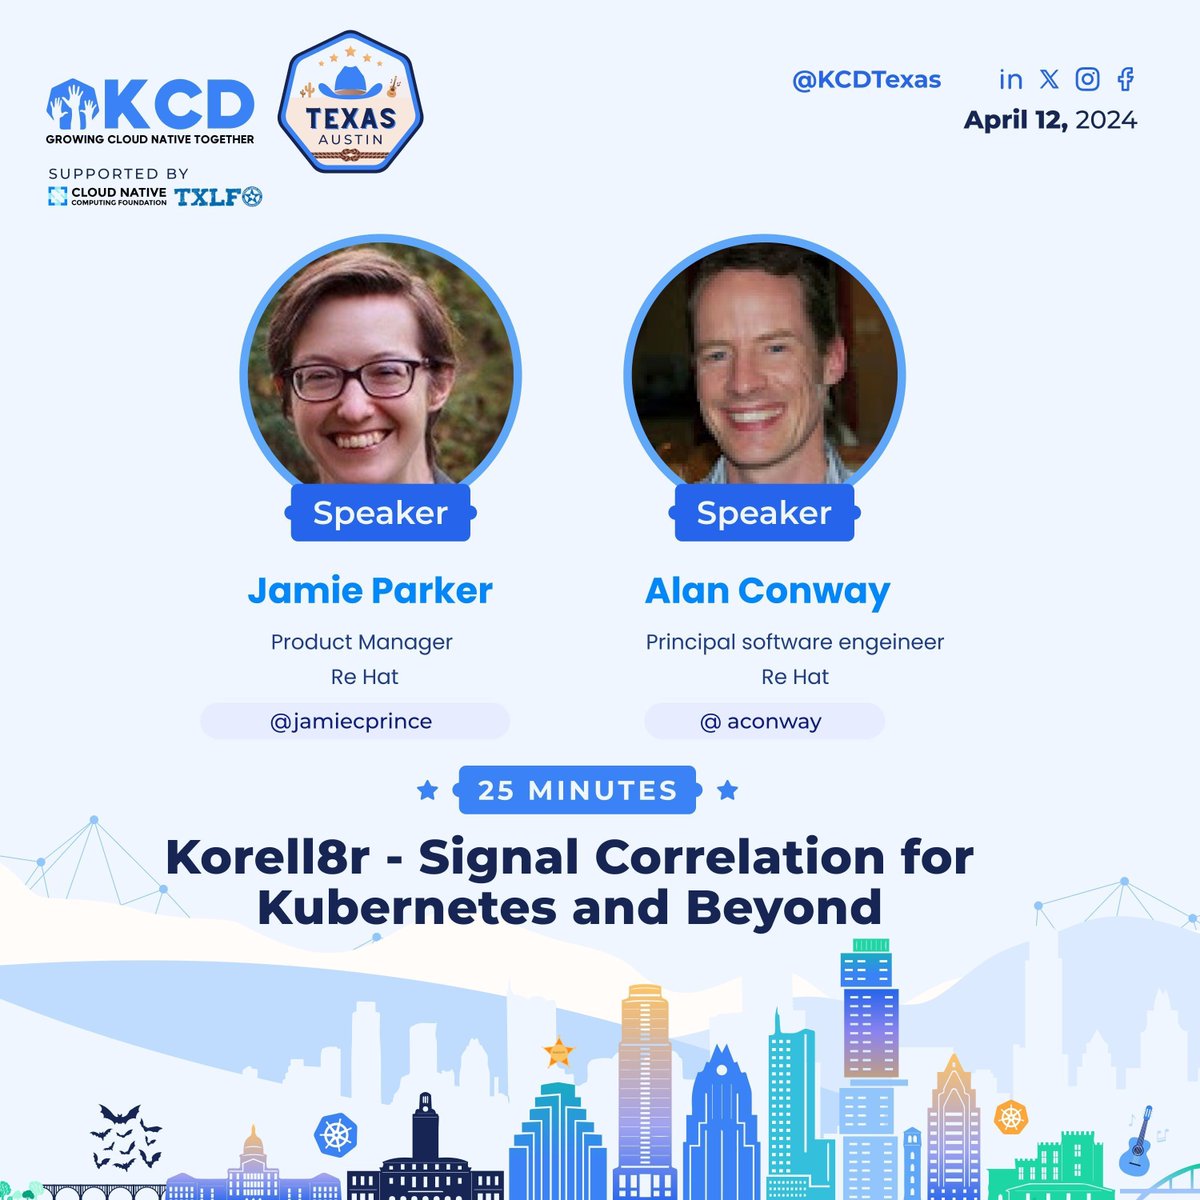 Unravel the mysteries of #Kubernetes with Alan Conway & Jamie Parker at #KCDTexas. Their talk on Korrel8r will guide you through correlating observability signals for more precise insights. Register here: 🔗 texaskcd.com #KCD #CNCF #TXLF #ATX #CNCF